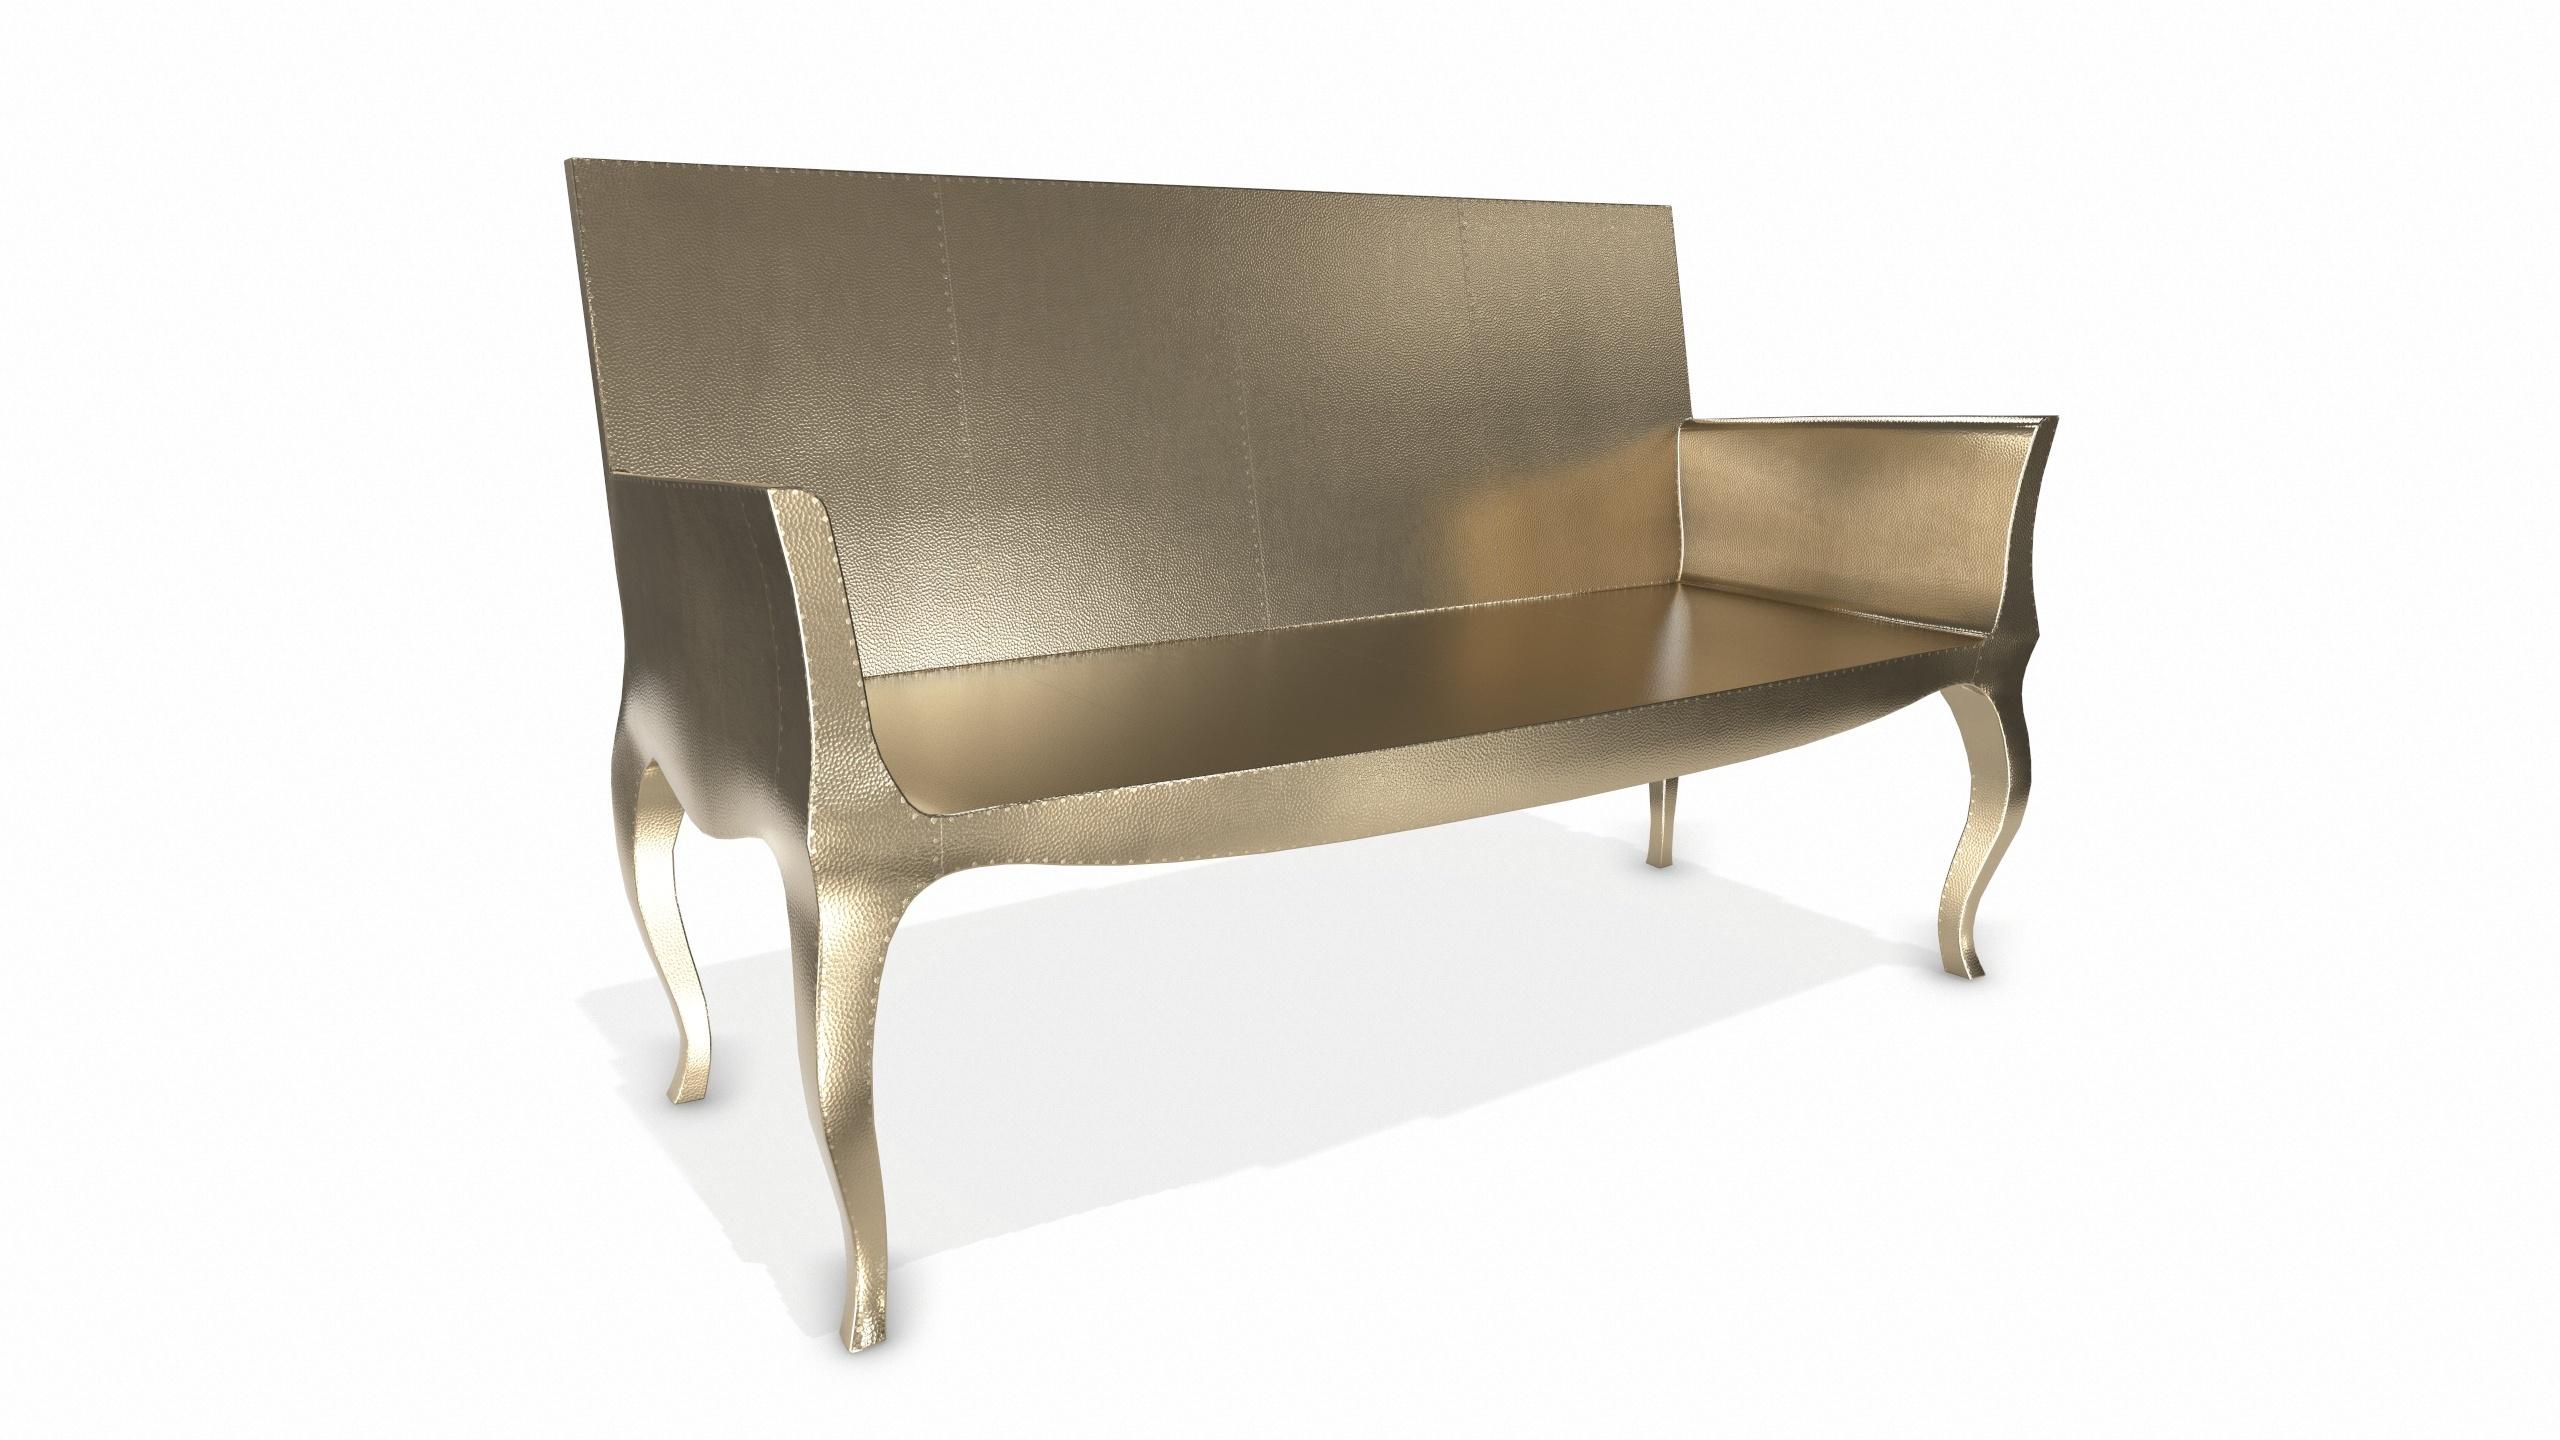 Contemporary Louise Settee Art Deco Daybeds in Mid. Hammered Brass by Paul Mathieu For Sale